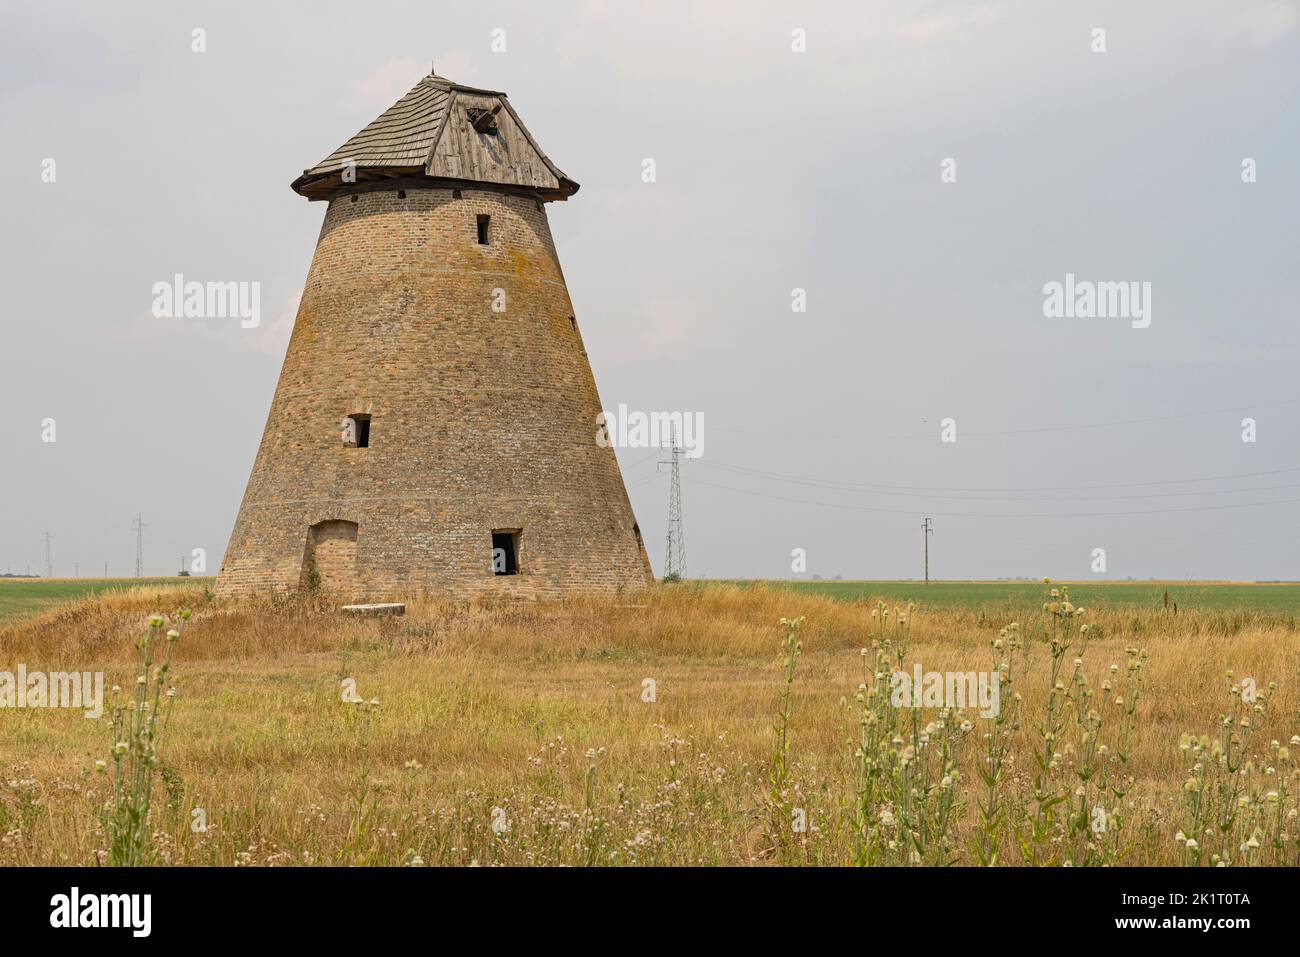 Melenci, Serbia - July 30, 2022: Abandoned Old Windmill Structure at Field Near Village Melenci in Vojvodina. Stock Photo